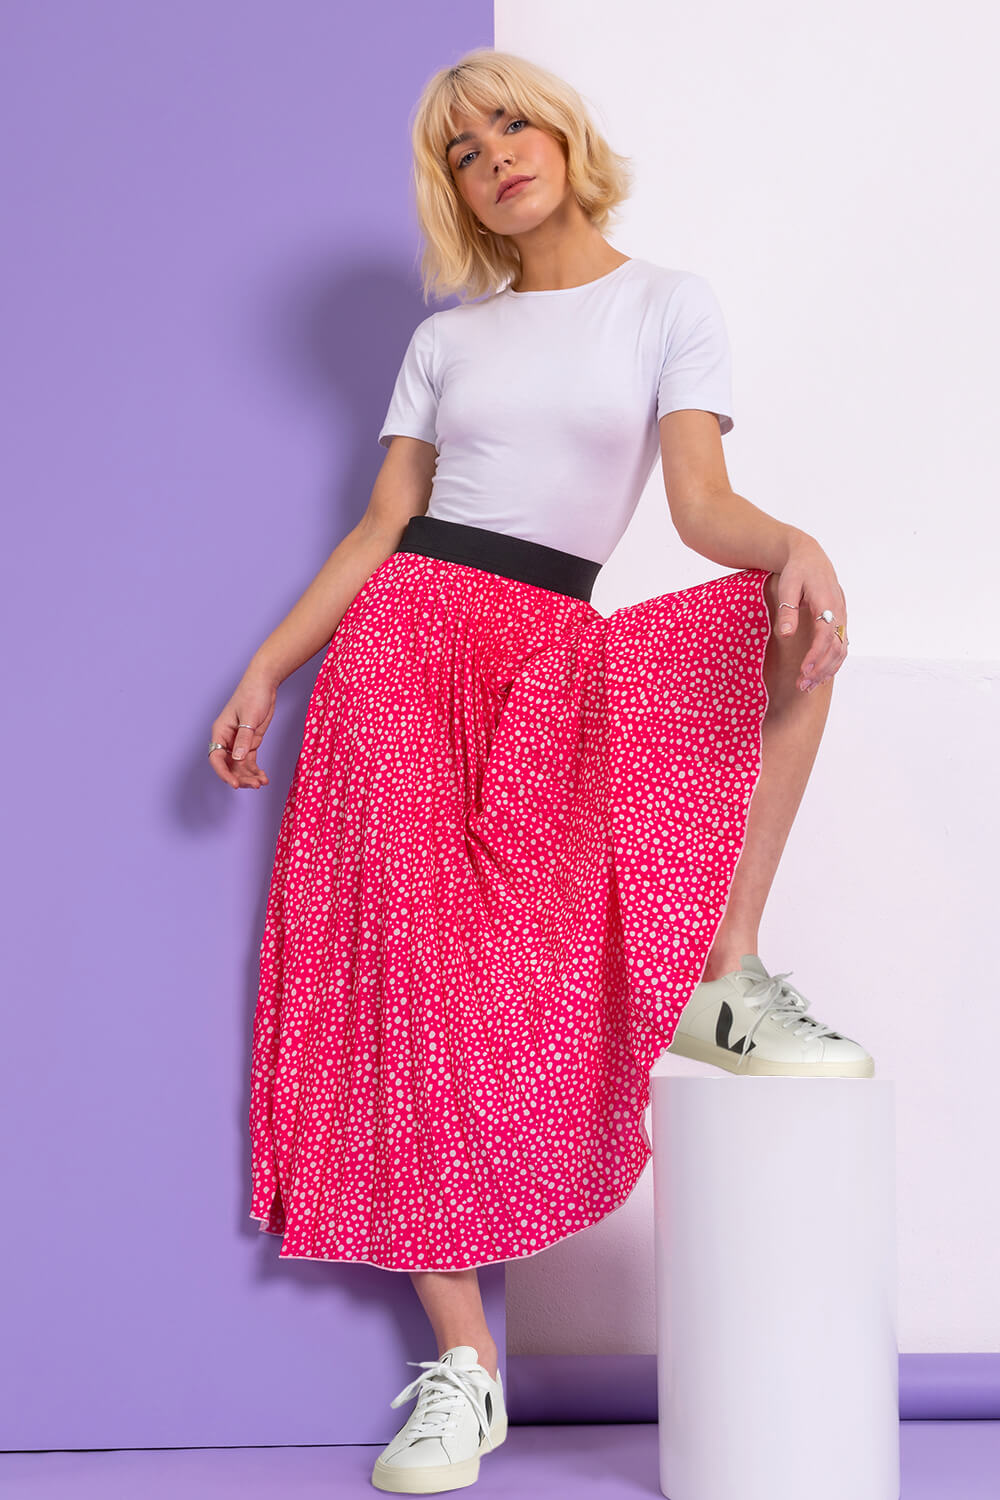 PINK Ditsy Spot Print Pleated Skirt, Image 4 of 4